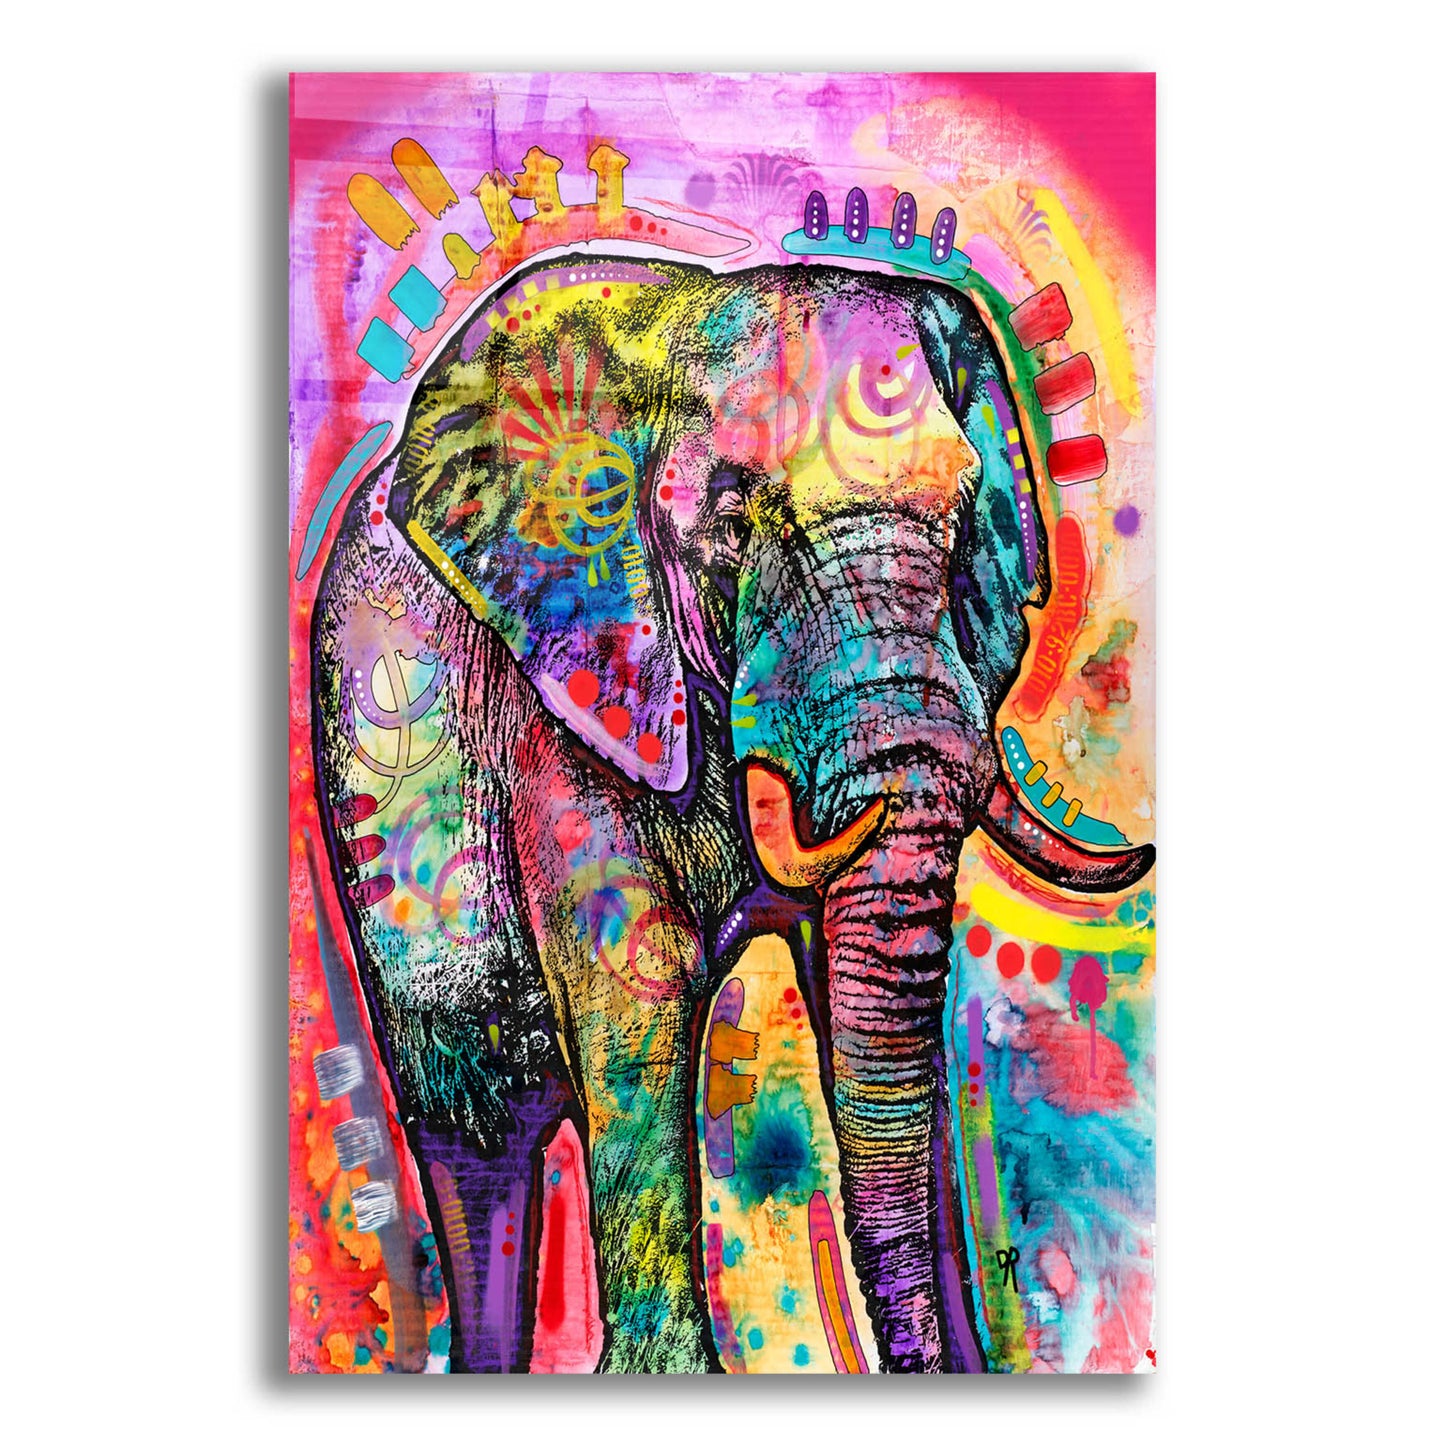 Epic Art 'Elephant in Charge' by Dean Russo, Acrylic Glass Wall Art,16x24